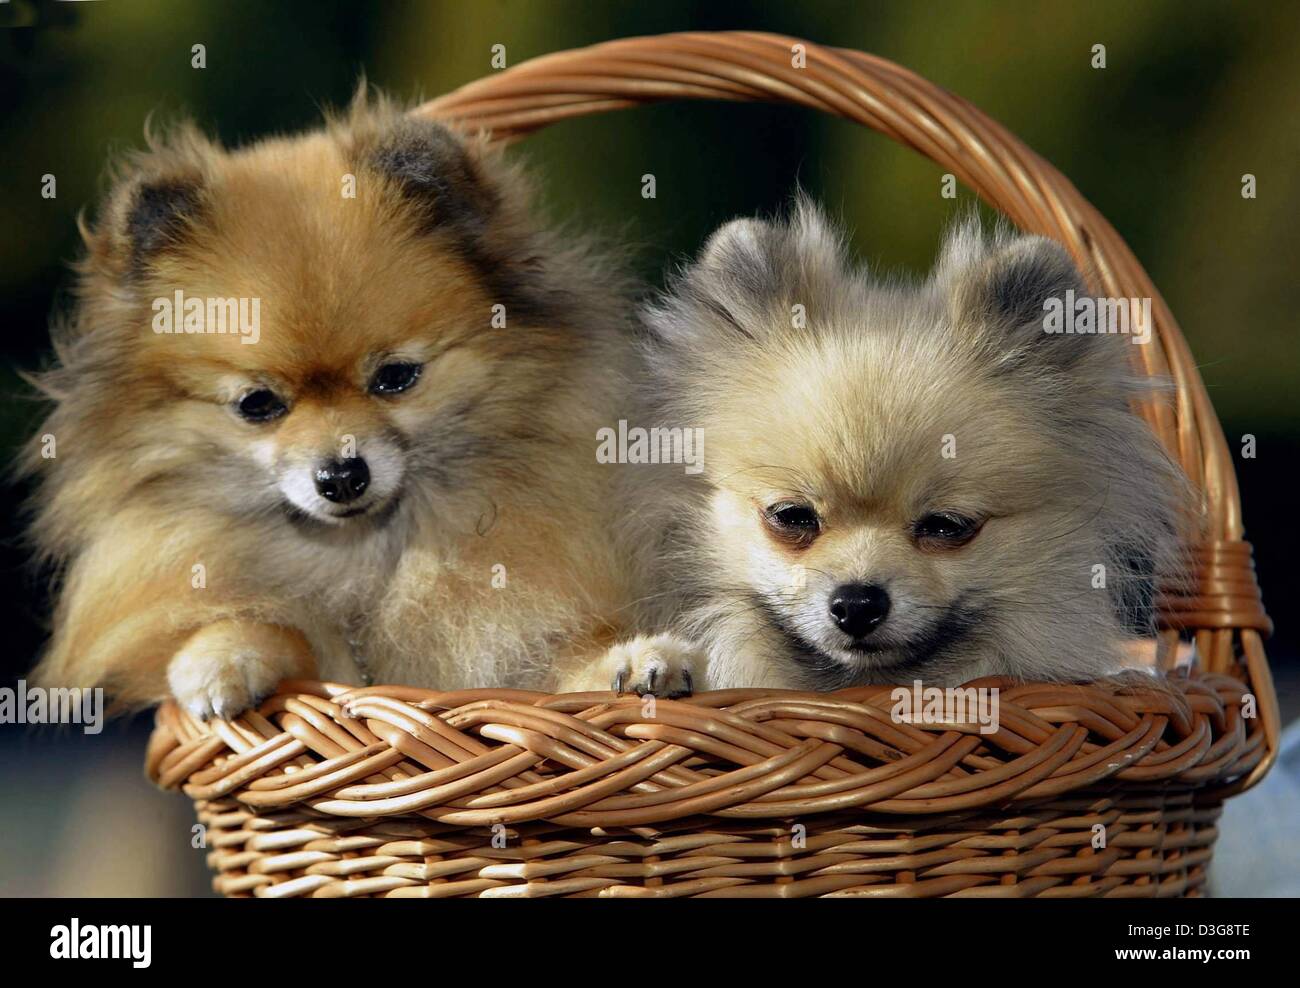 (dpa) - The two Pomeranian dogs Mona (L) and Yasmin look out of a basket during a dog breeders's show in Dortmund, Germany, 14 October 2003. The two dogs are the winners of the breeding show. Stock Photo